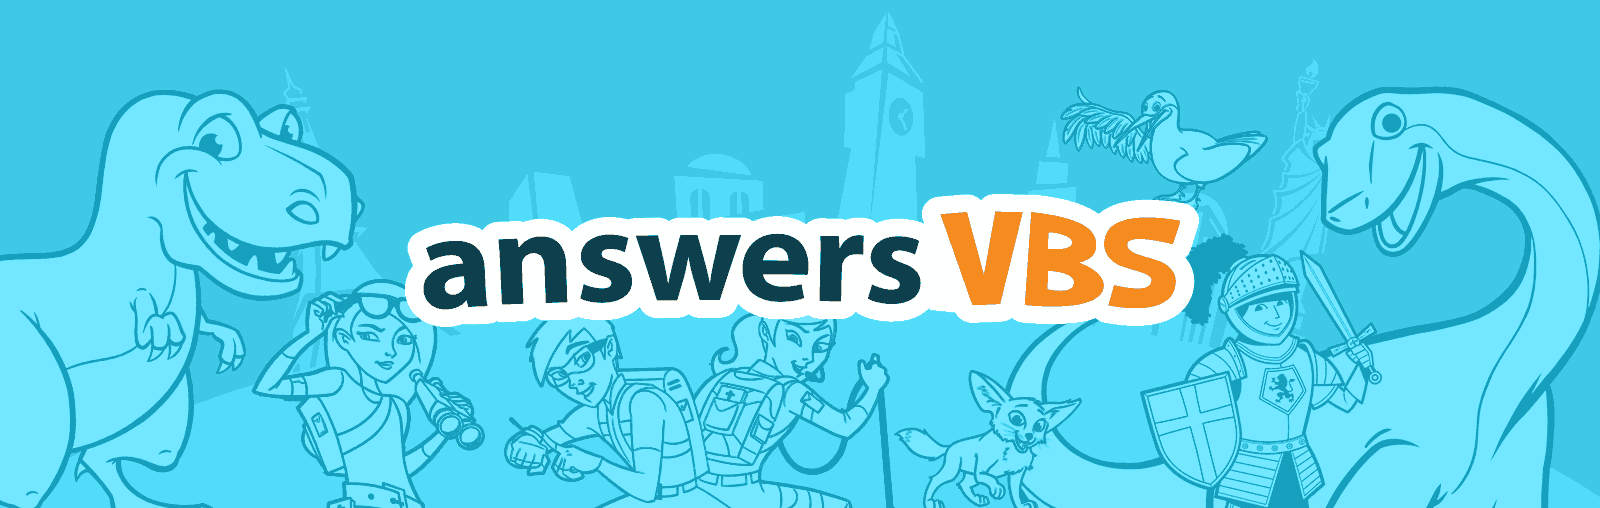 Get a Sneak Peek at Answers VBS 2018: Time Lab